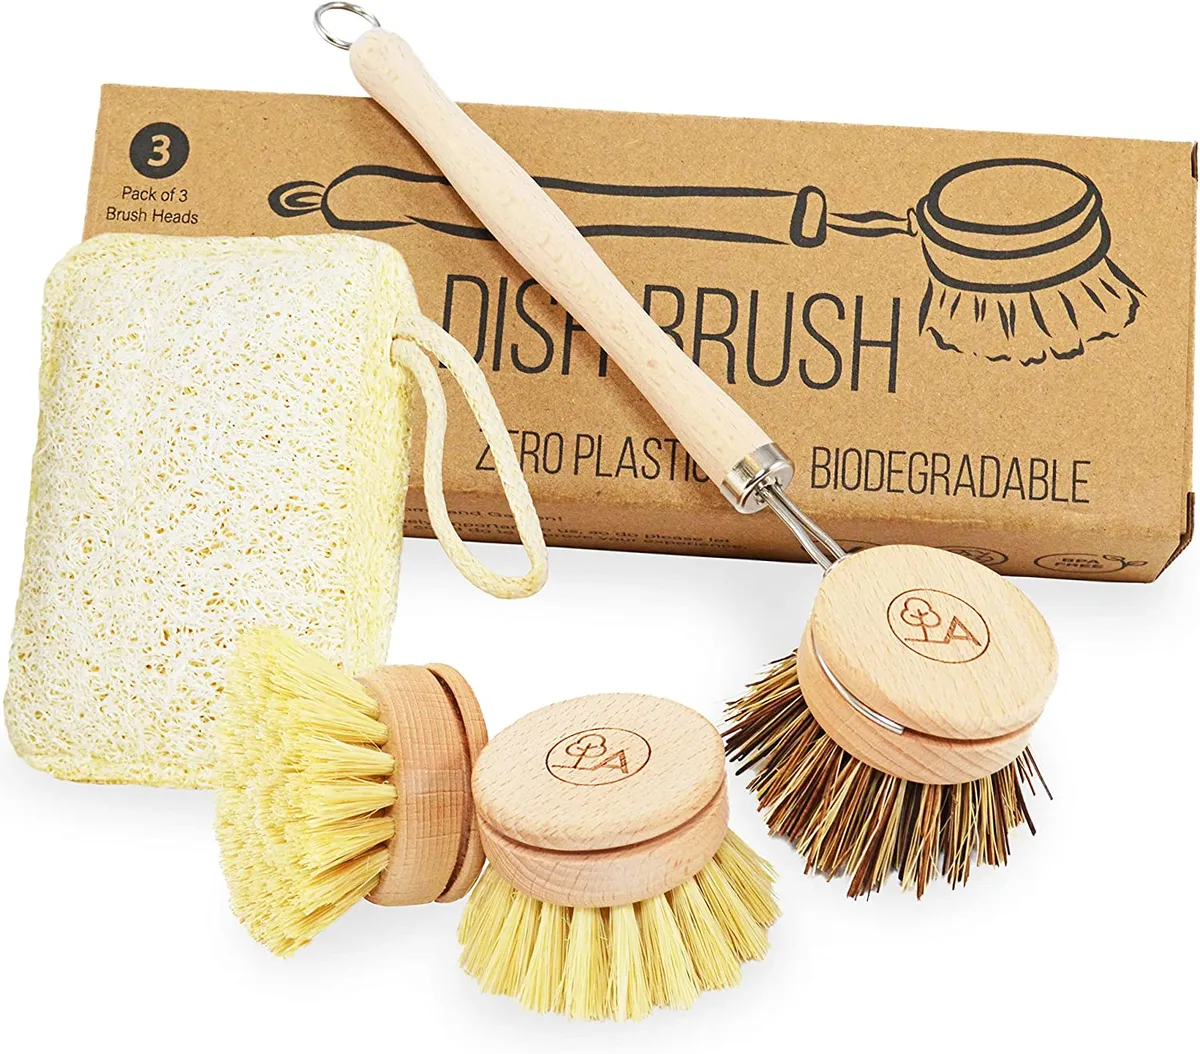 Dish brush with replacement heads